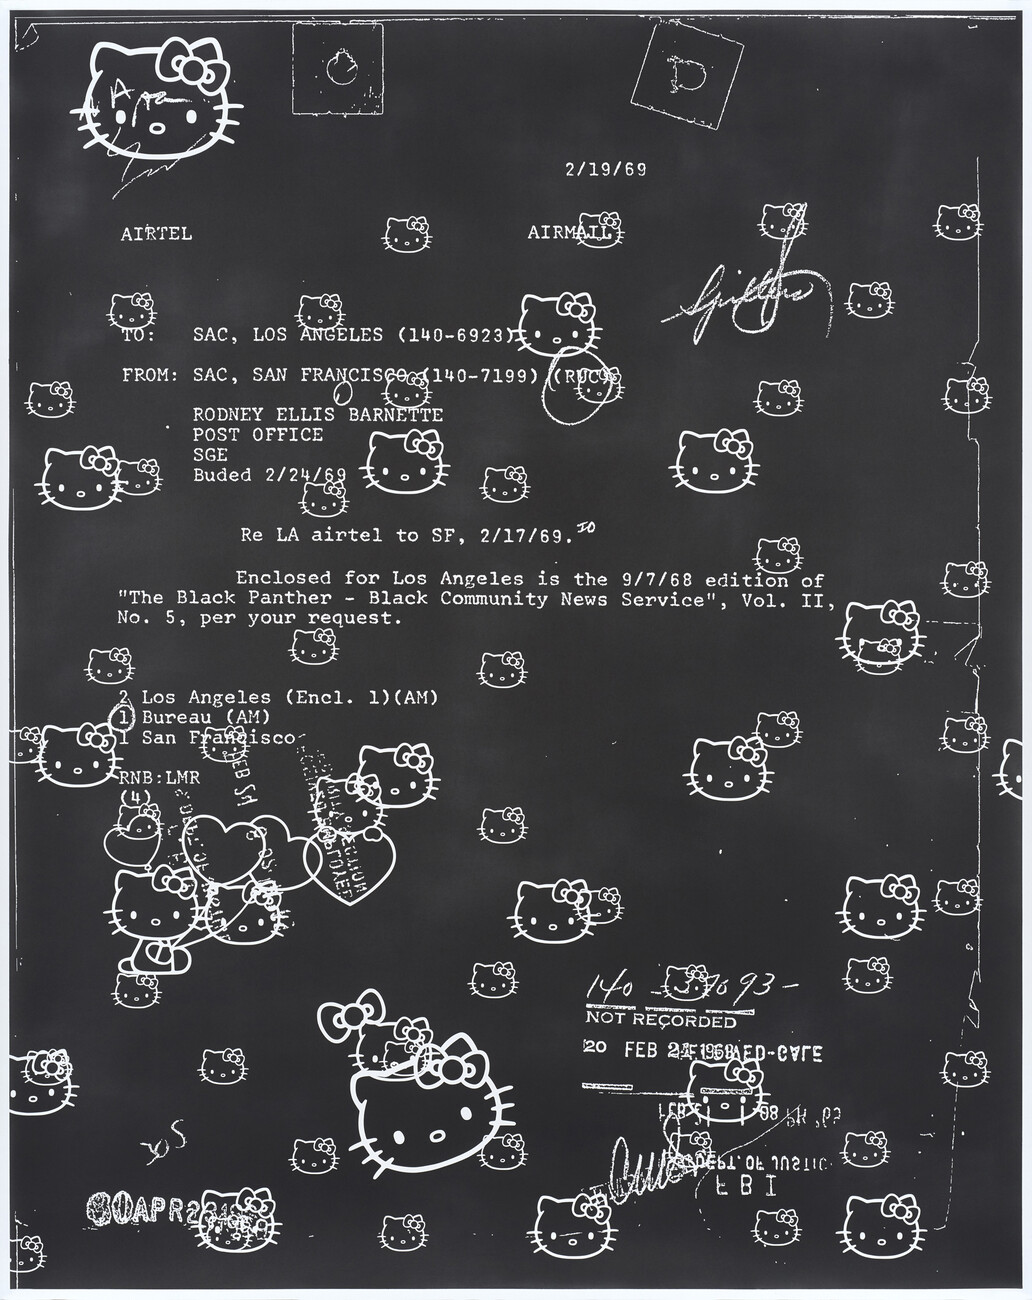 Photocopy of text file with adornment in shape of Hello Kitty